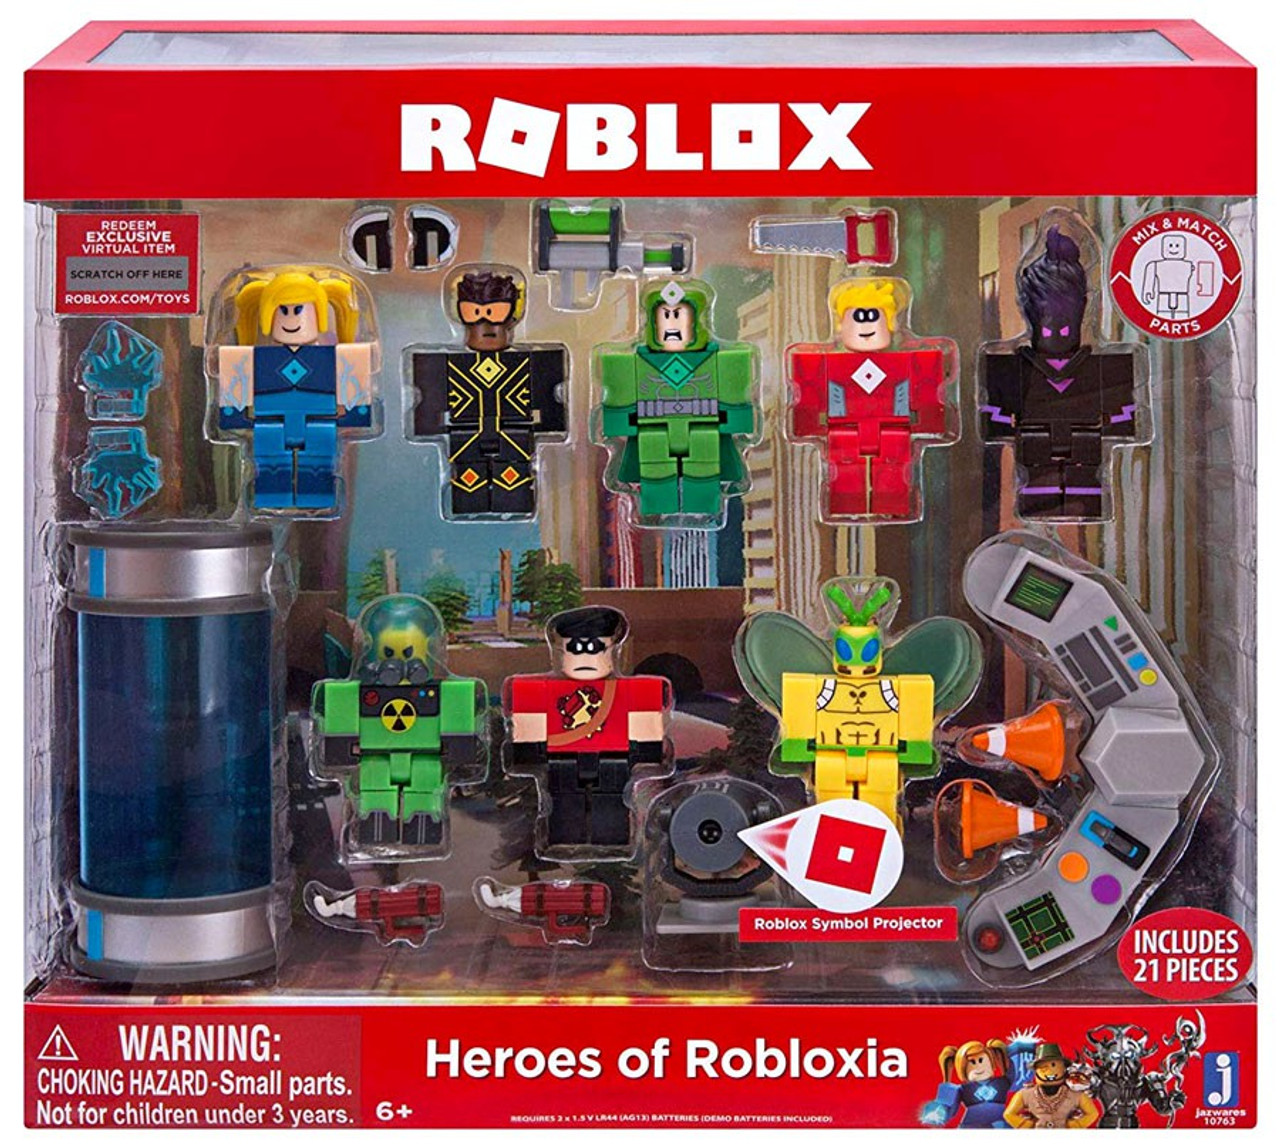 Roblox Heroes Of Robloxia 3 Action Figure 8 Pack Jazwares Toywiz - amazon com roblox action collection series 6 mystery figure 6 pack includes 6 exclusive virtual items toys games